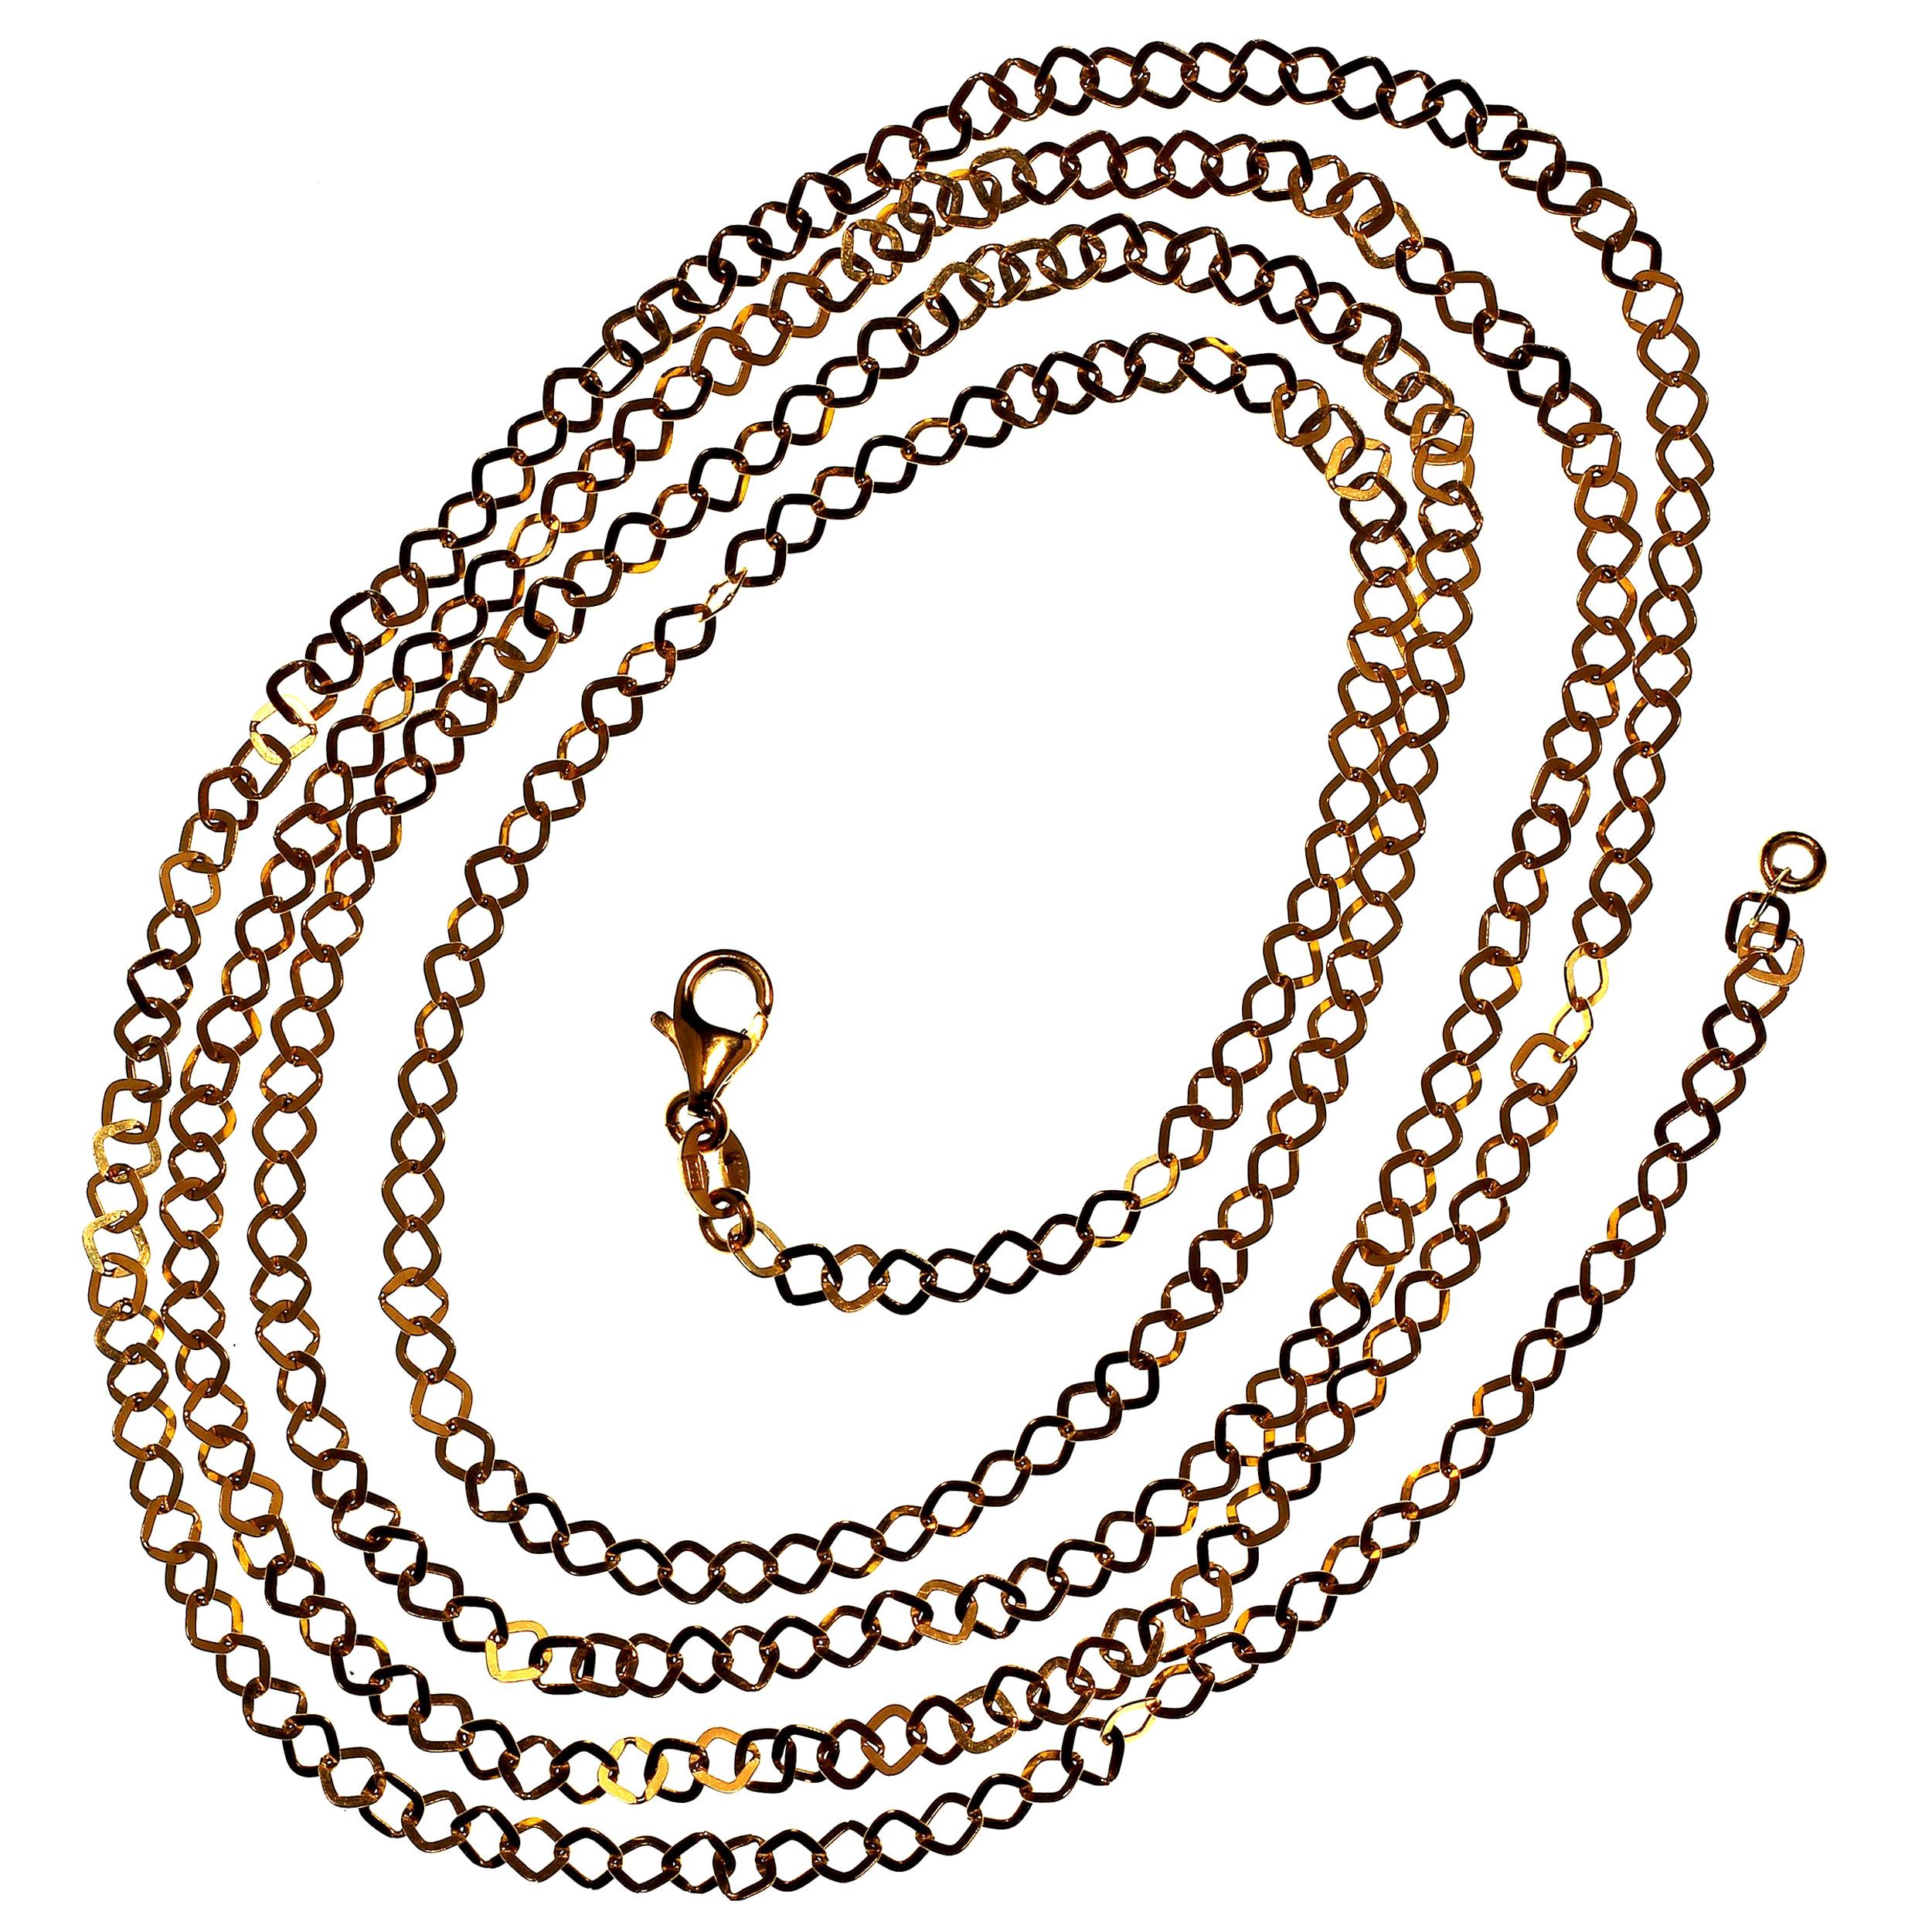 Lovely 14K yellow gold chain in luxurious 40 inch length.  This is a wonderful length for wearing with collared shirts and sweaters. Each link is a square with rounded corners. The interior is cut so that the links sit in each corner to create